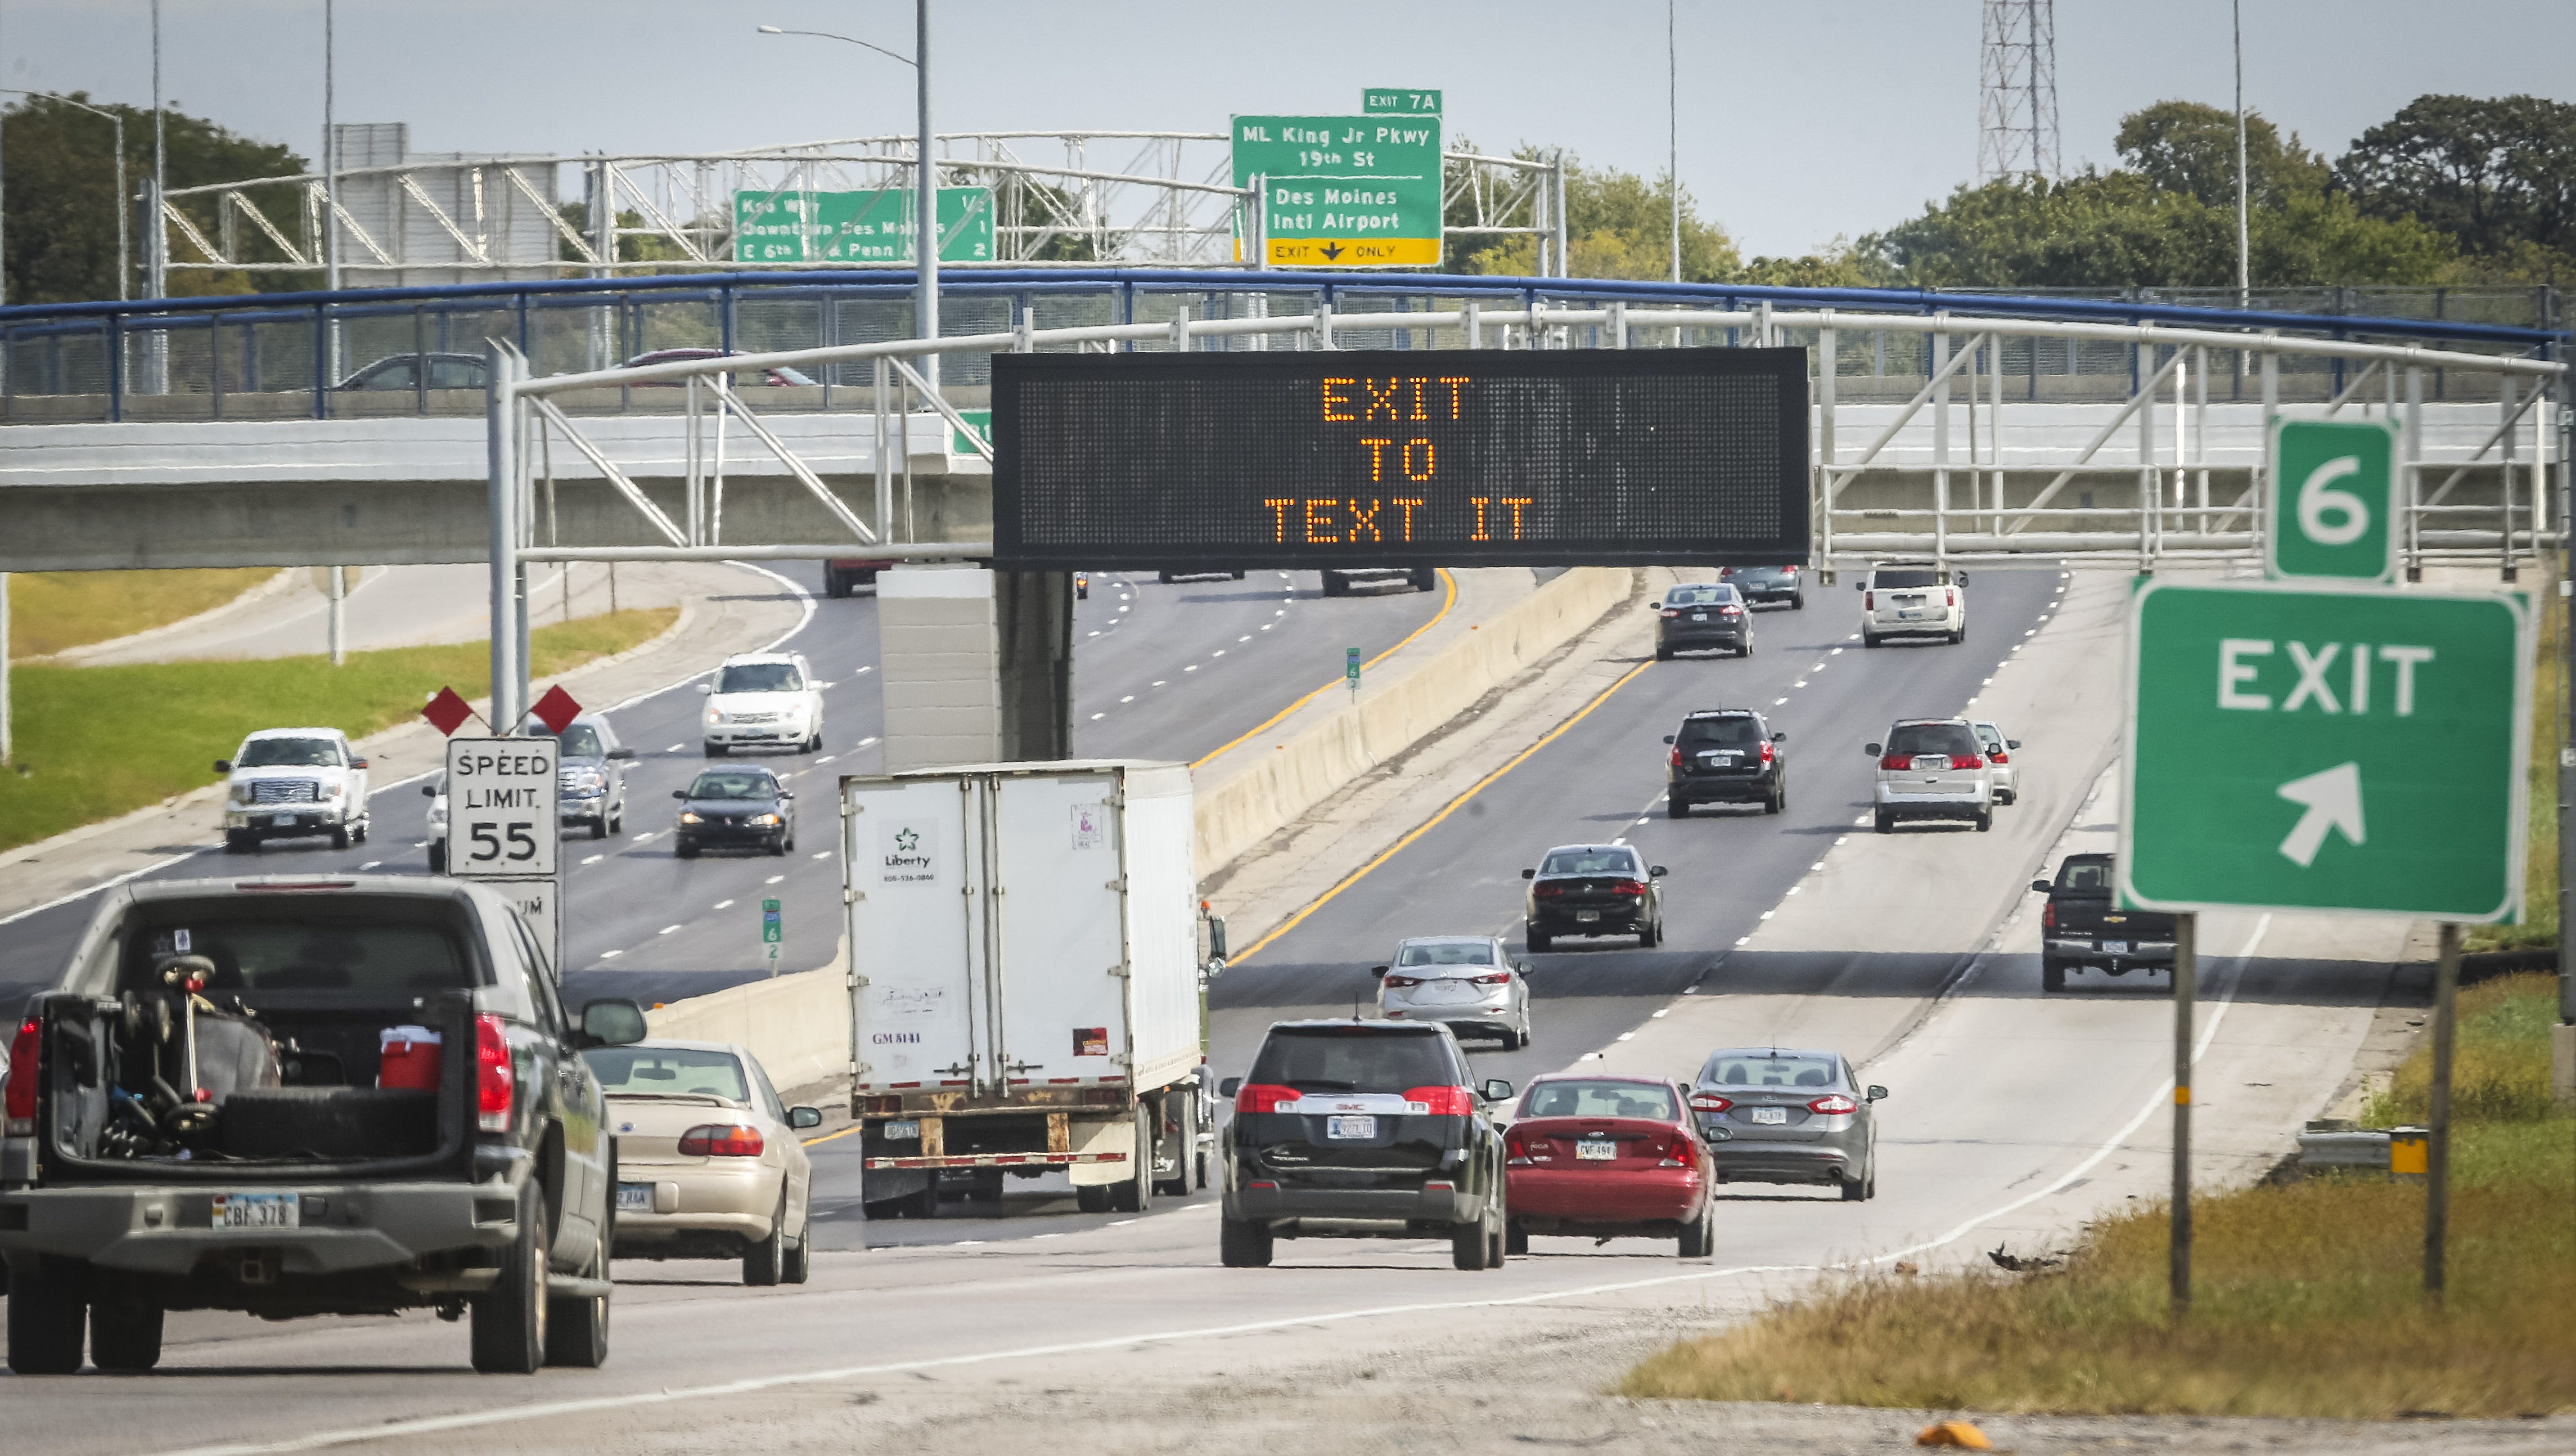 Drivers chuckle at funny highway message signs